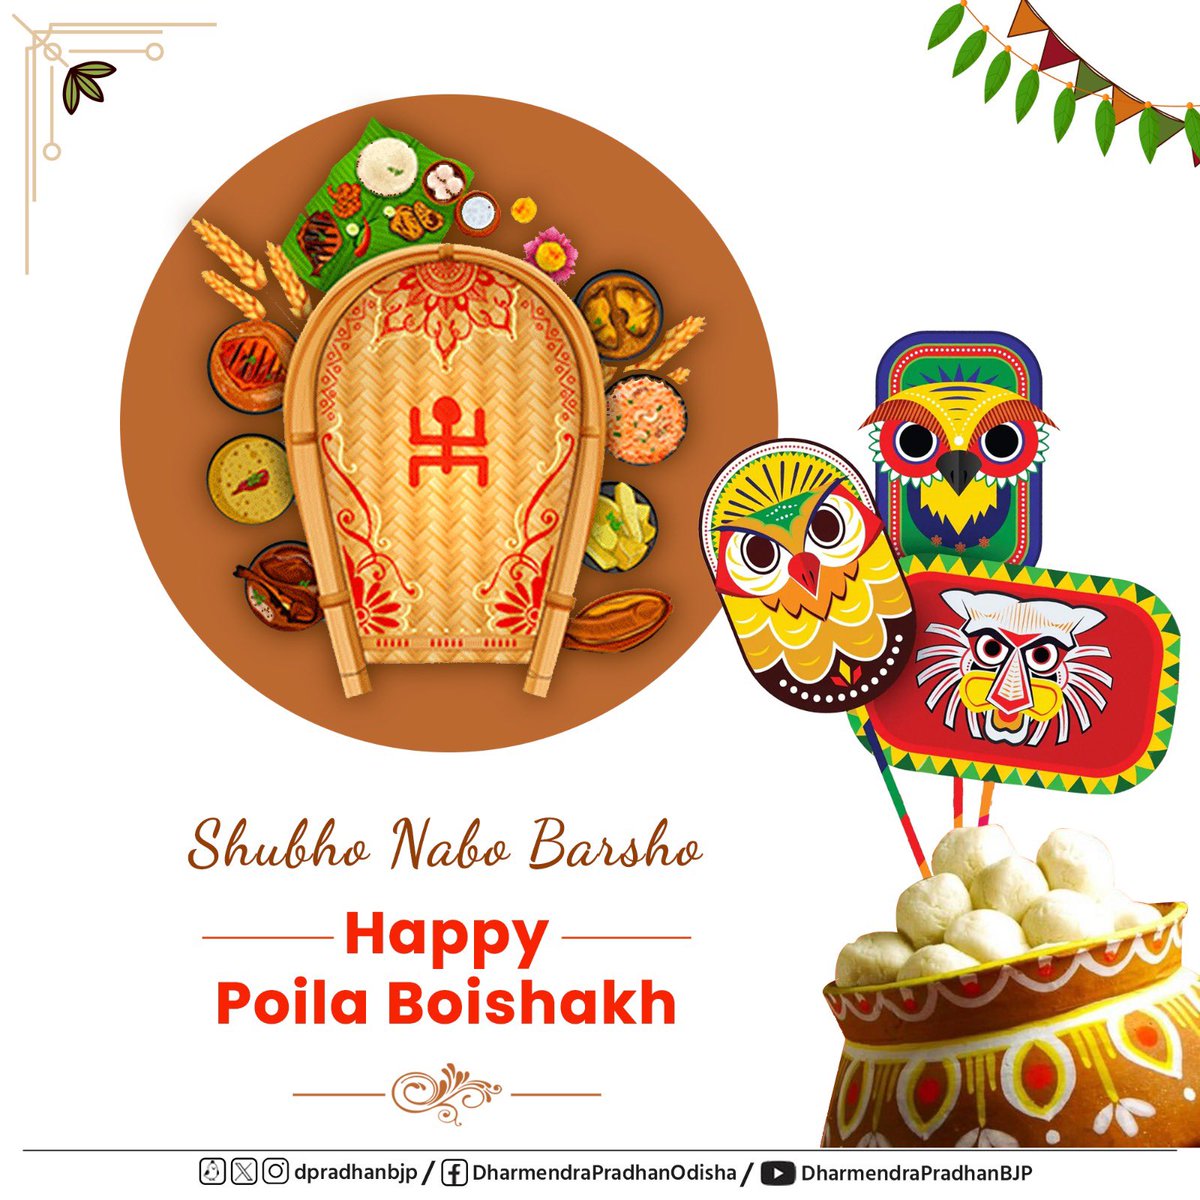 Shubho Nabo Barsho!

Warmest wishes to our sisters and brothers in West Bengal on Poila Boishakh.